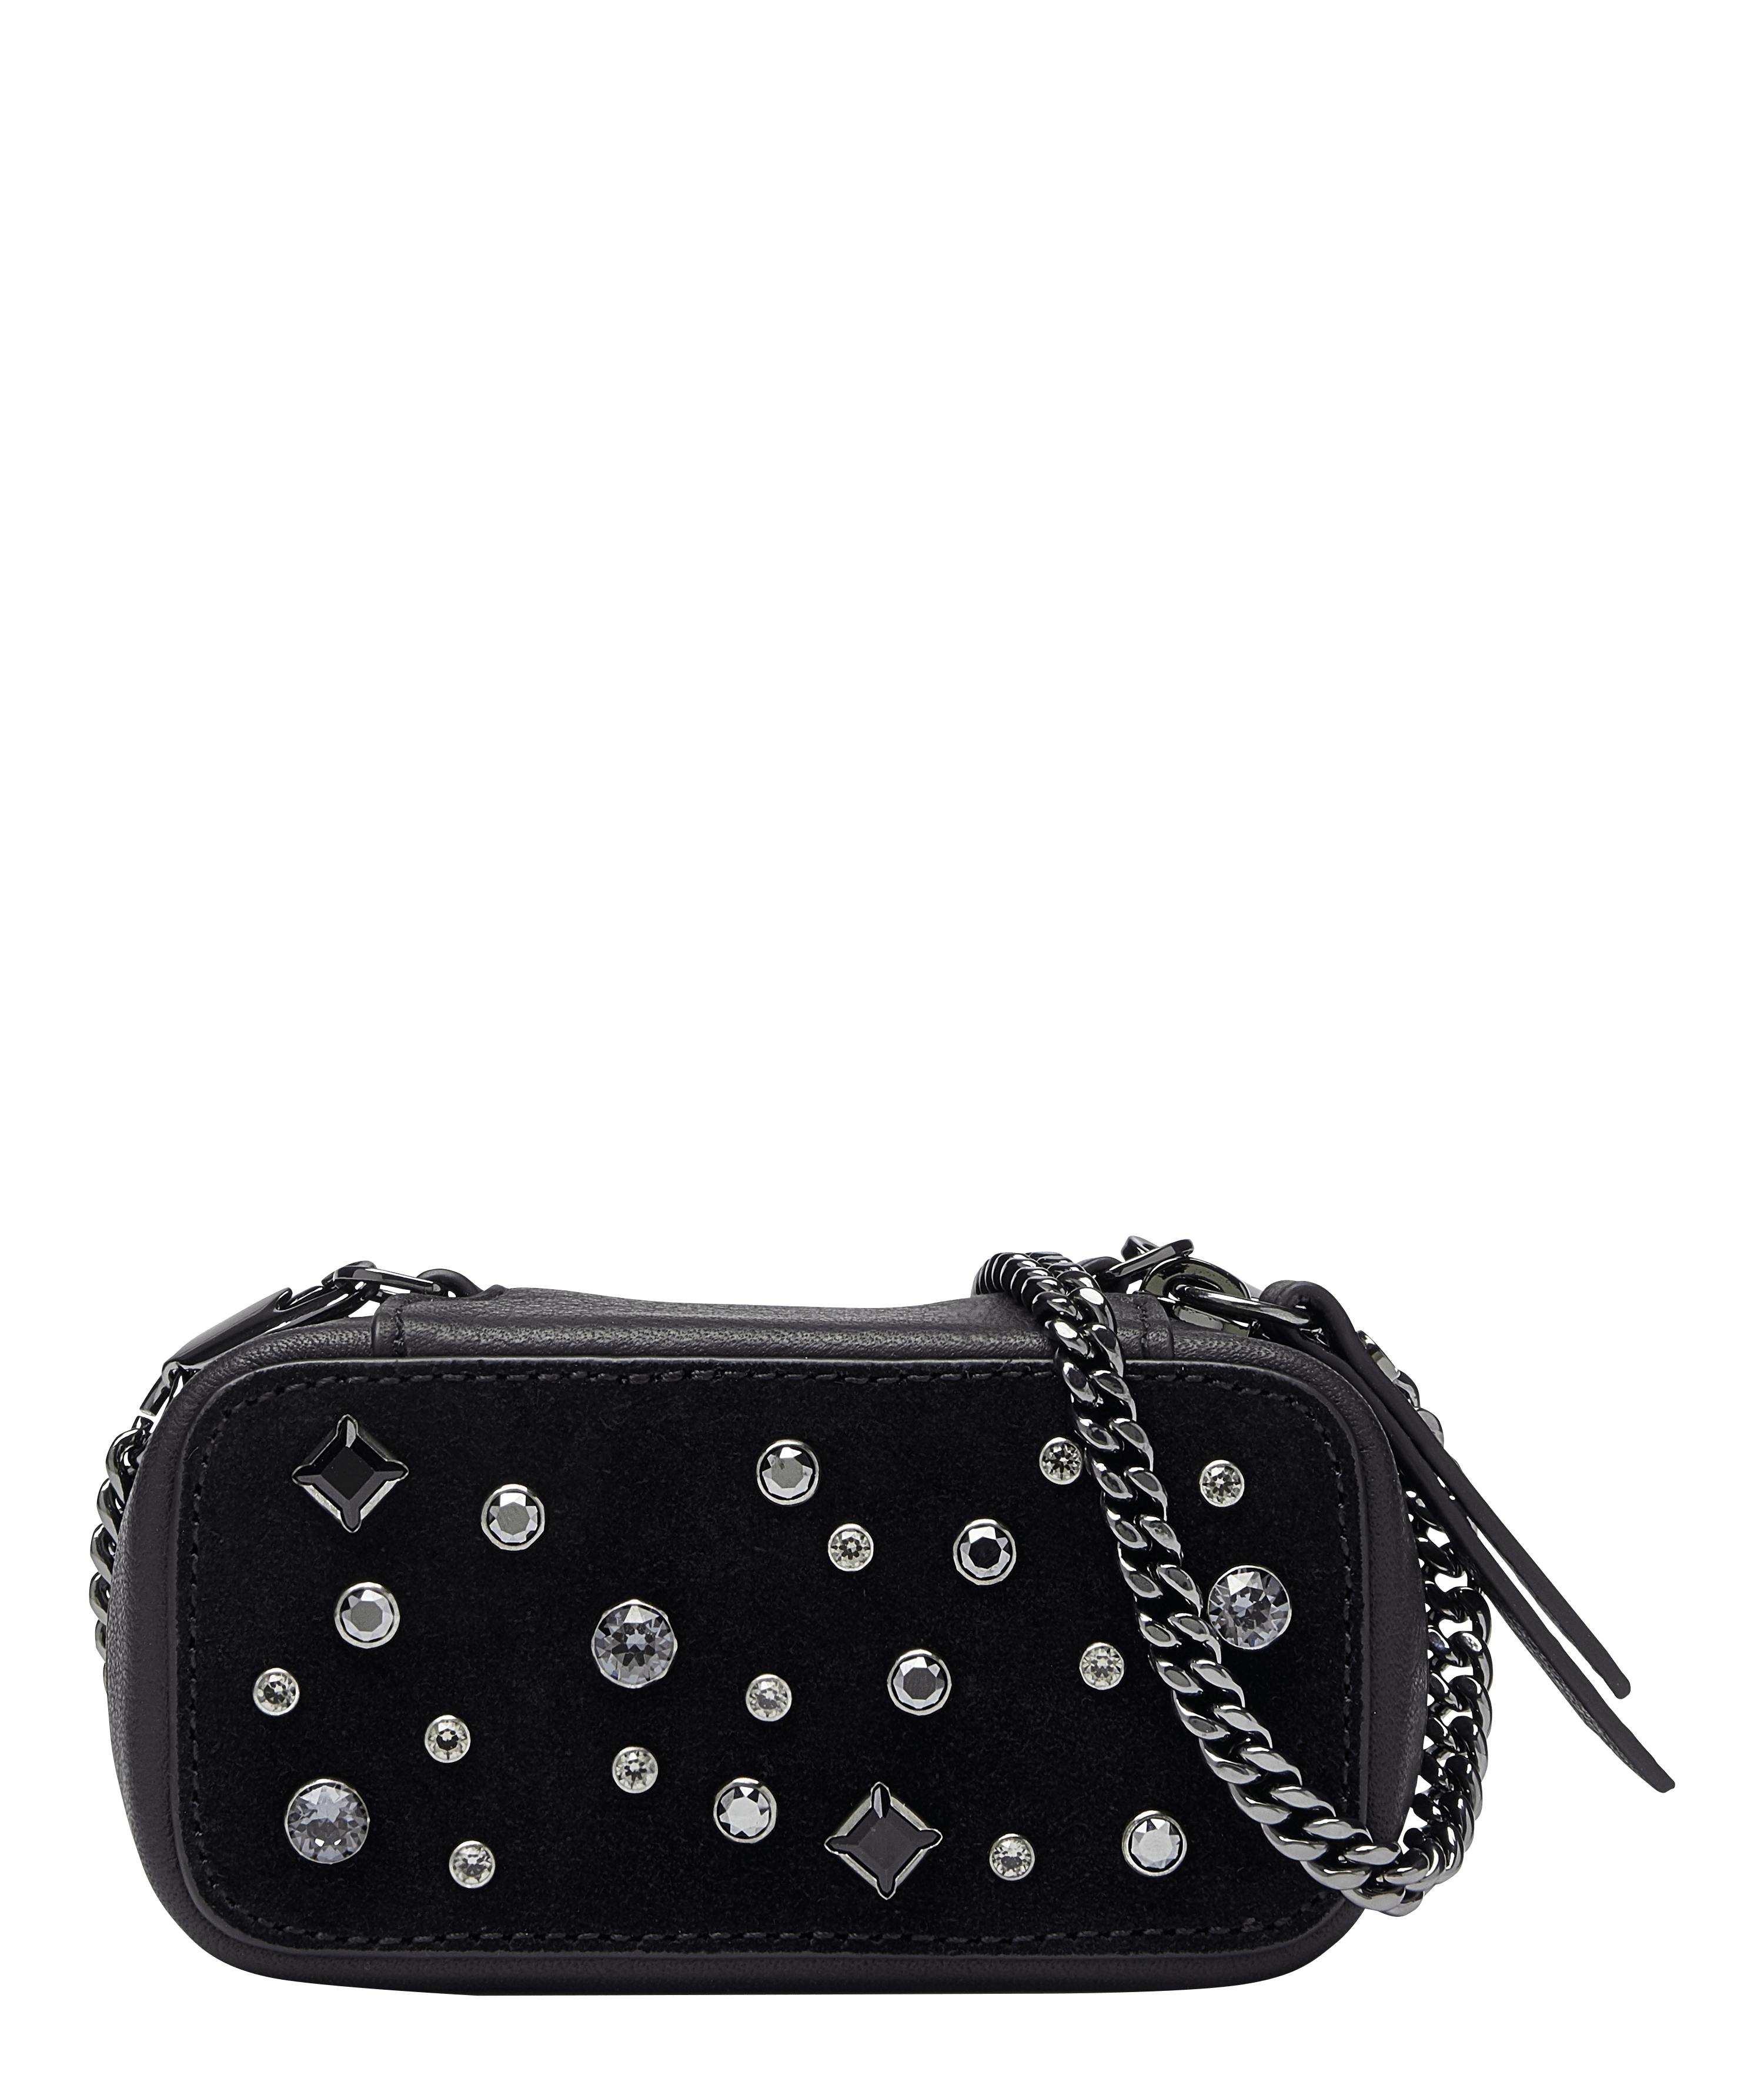 Liebeskind Capsule Collection Mini Bag